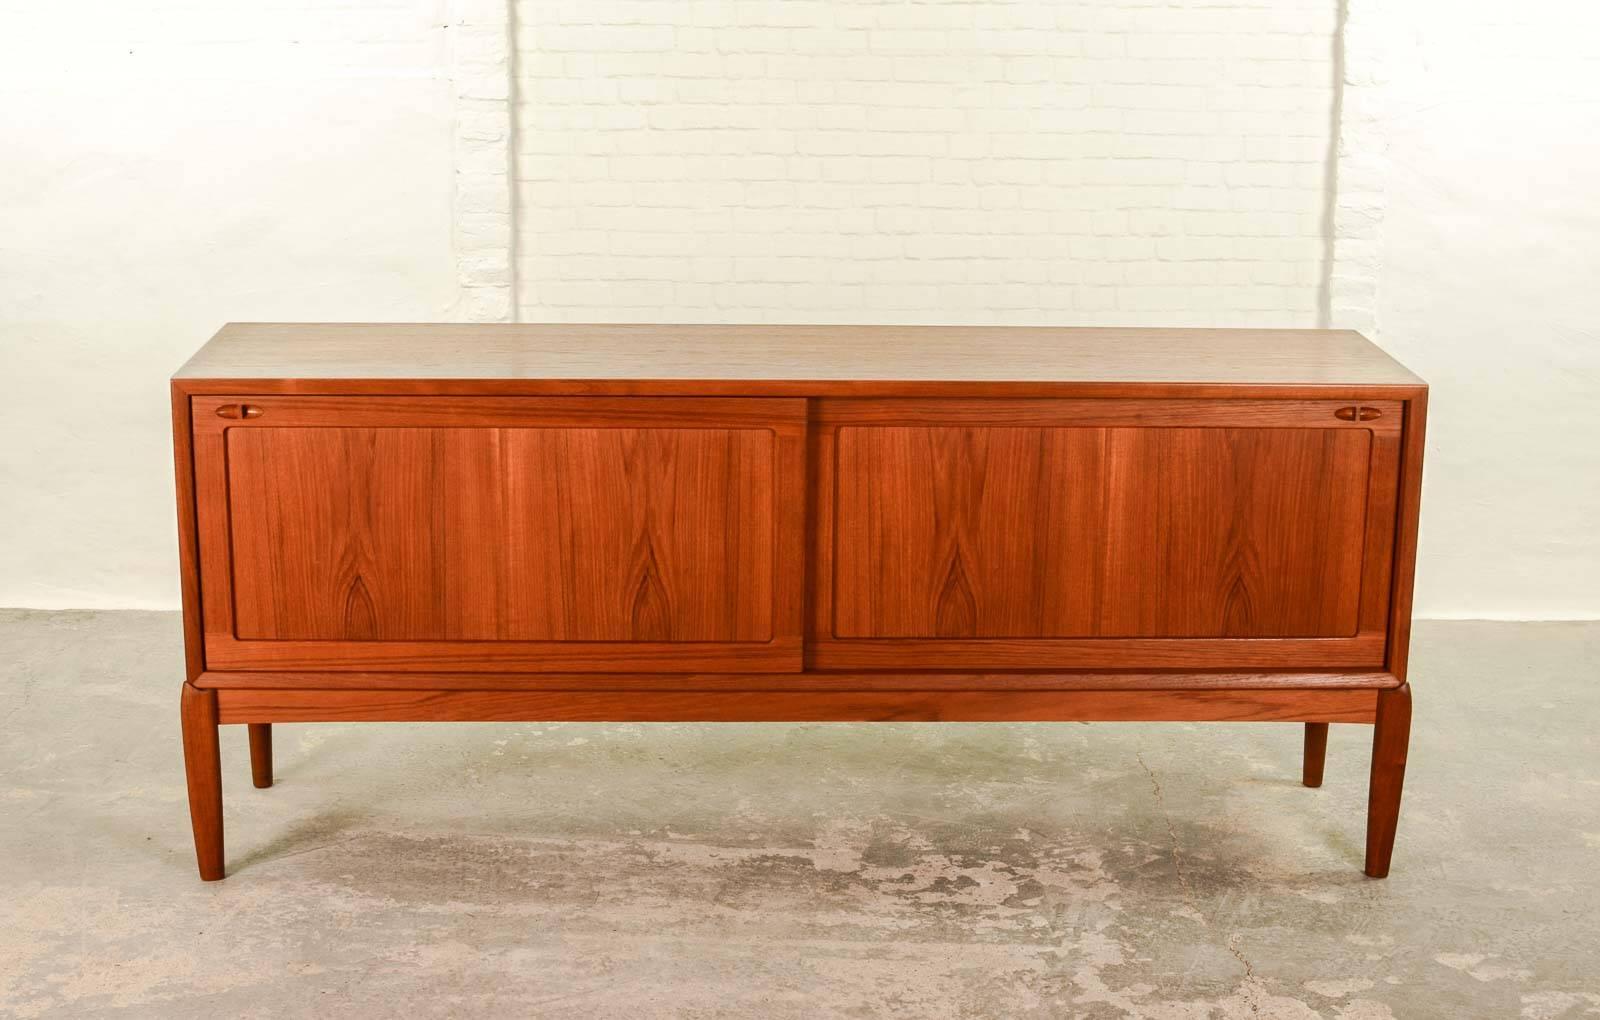 This beautiful high quality finished Mid-Century Danish sideboard or credenza is designed by H.W. Klein for Bramin in the 1960s. It features identical two sliding doors with subtle detailed teak handles. The left side contains one shelve; the right